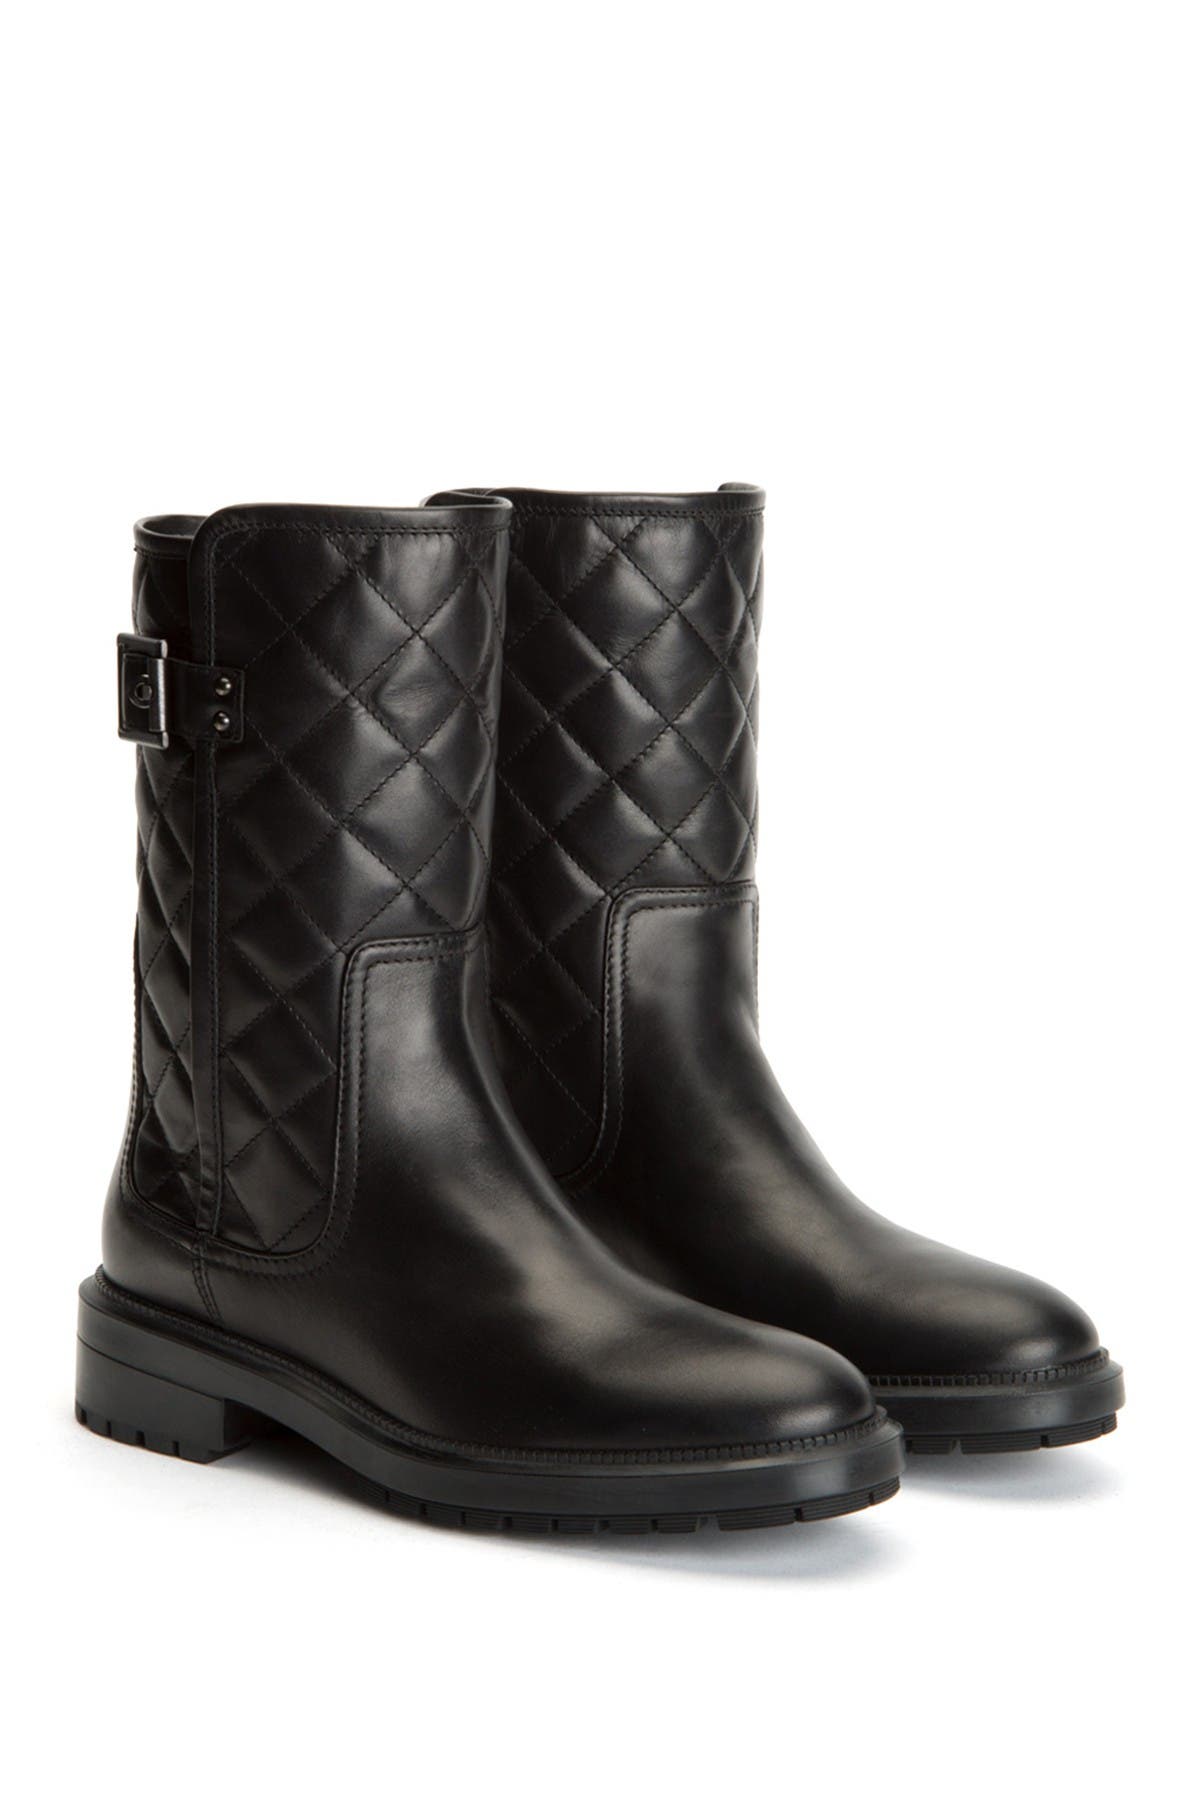 Aquatalia | Layla Quilted Leather Boot 